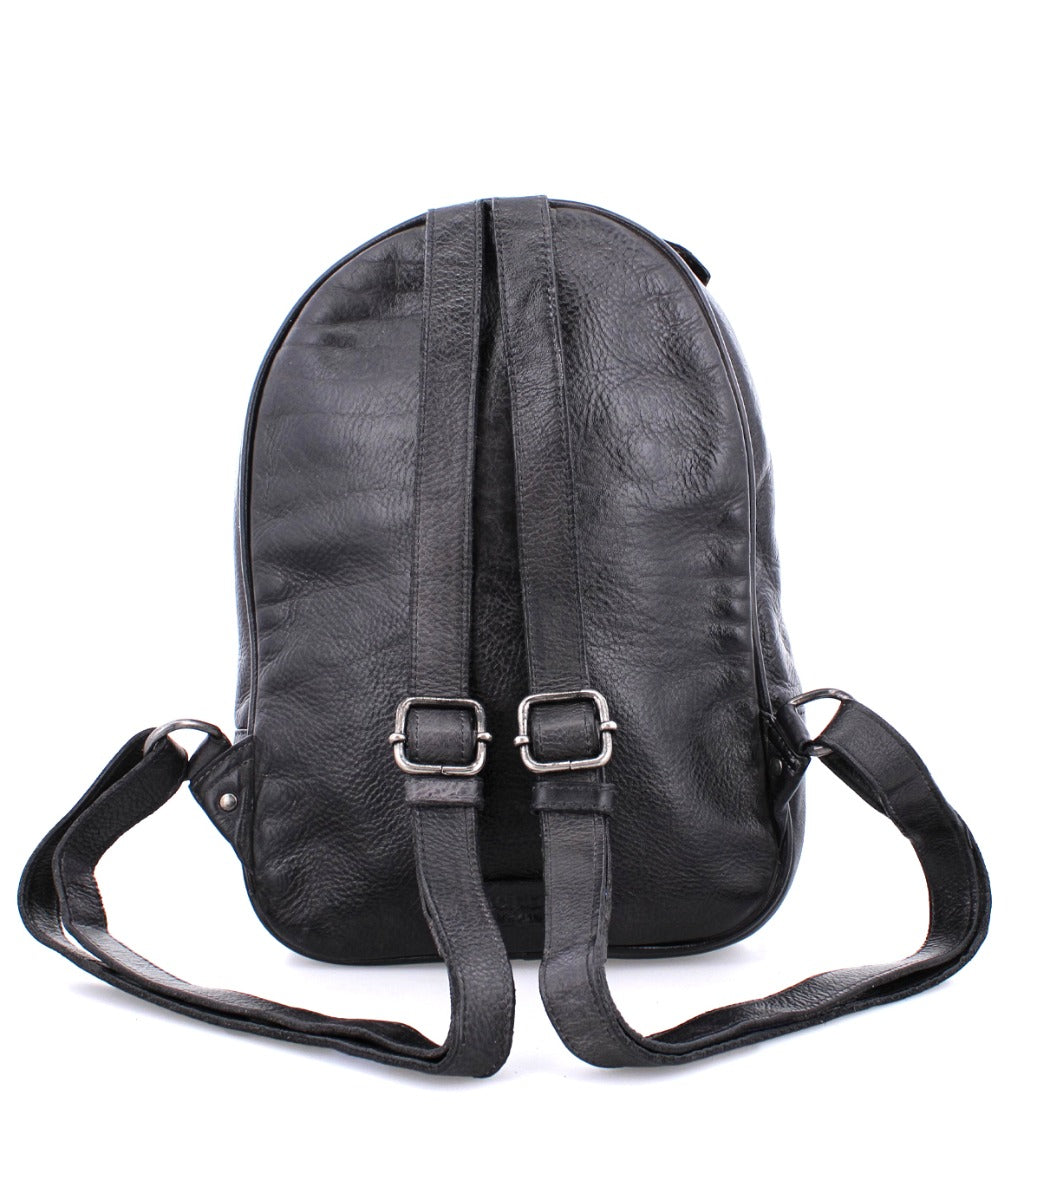 A black leather Dominique backpack with straps and buckles by Bed Stu.